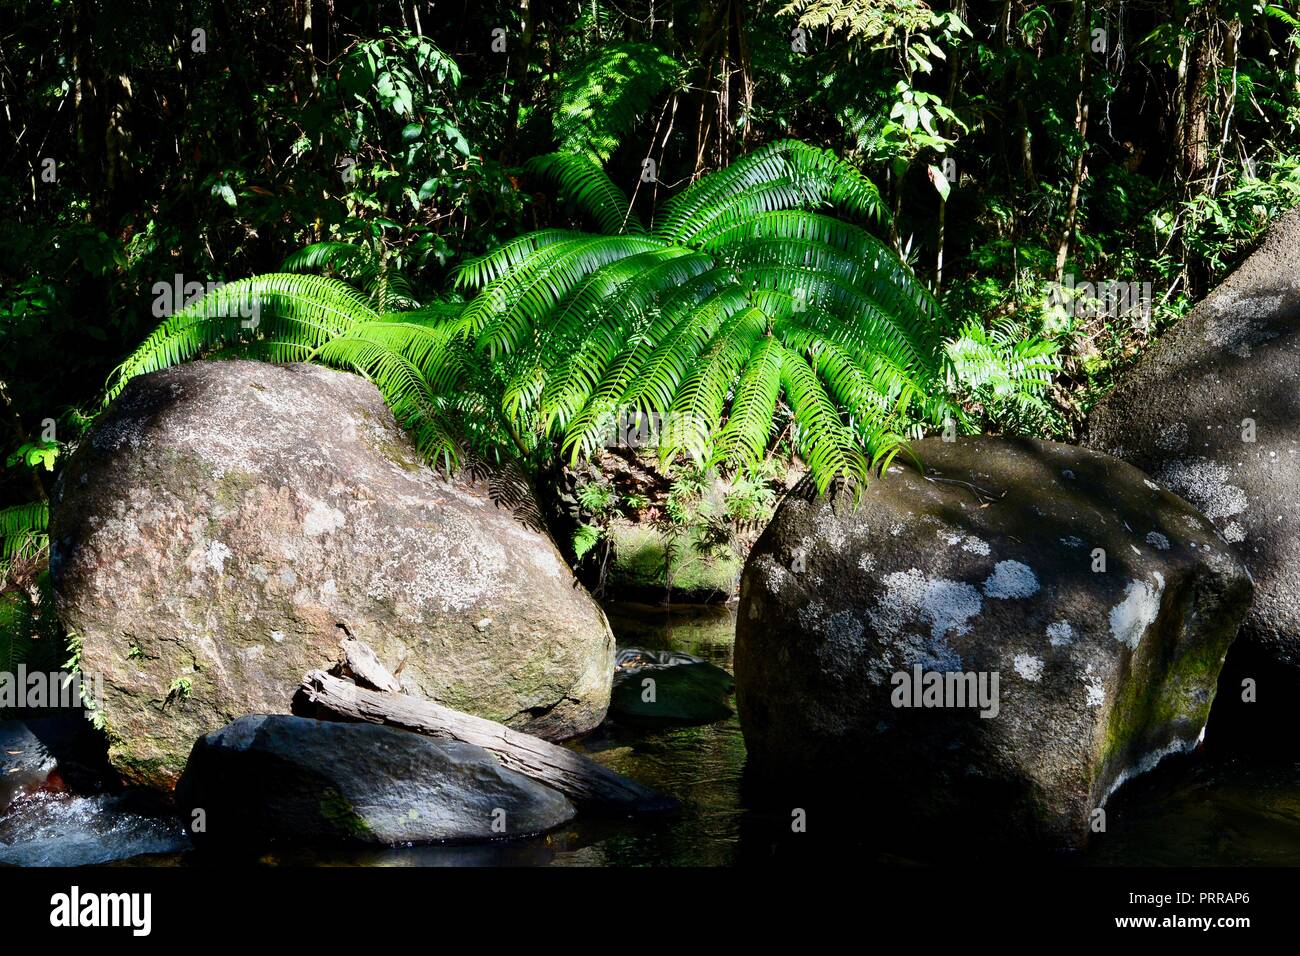 A giant tree fern Angiopteris evecta growing near a stream, South Johnstone camping area, Wooroonooran National Park, Queensland Stock Photo